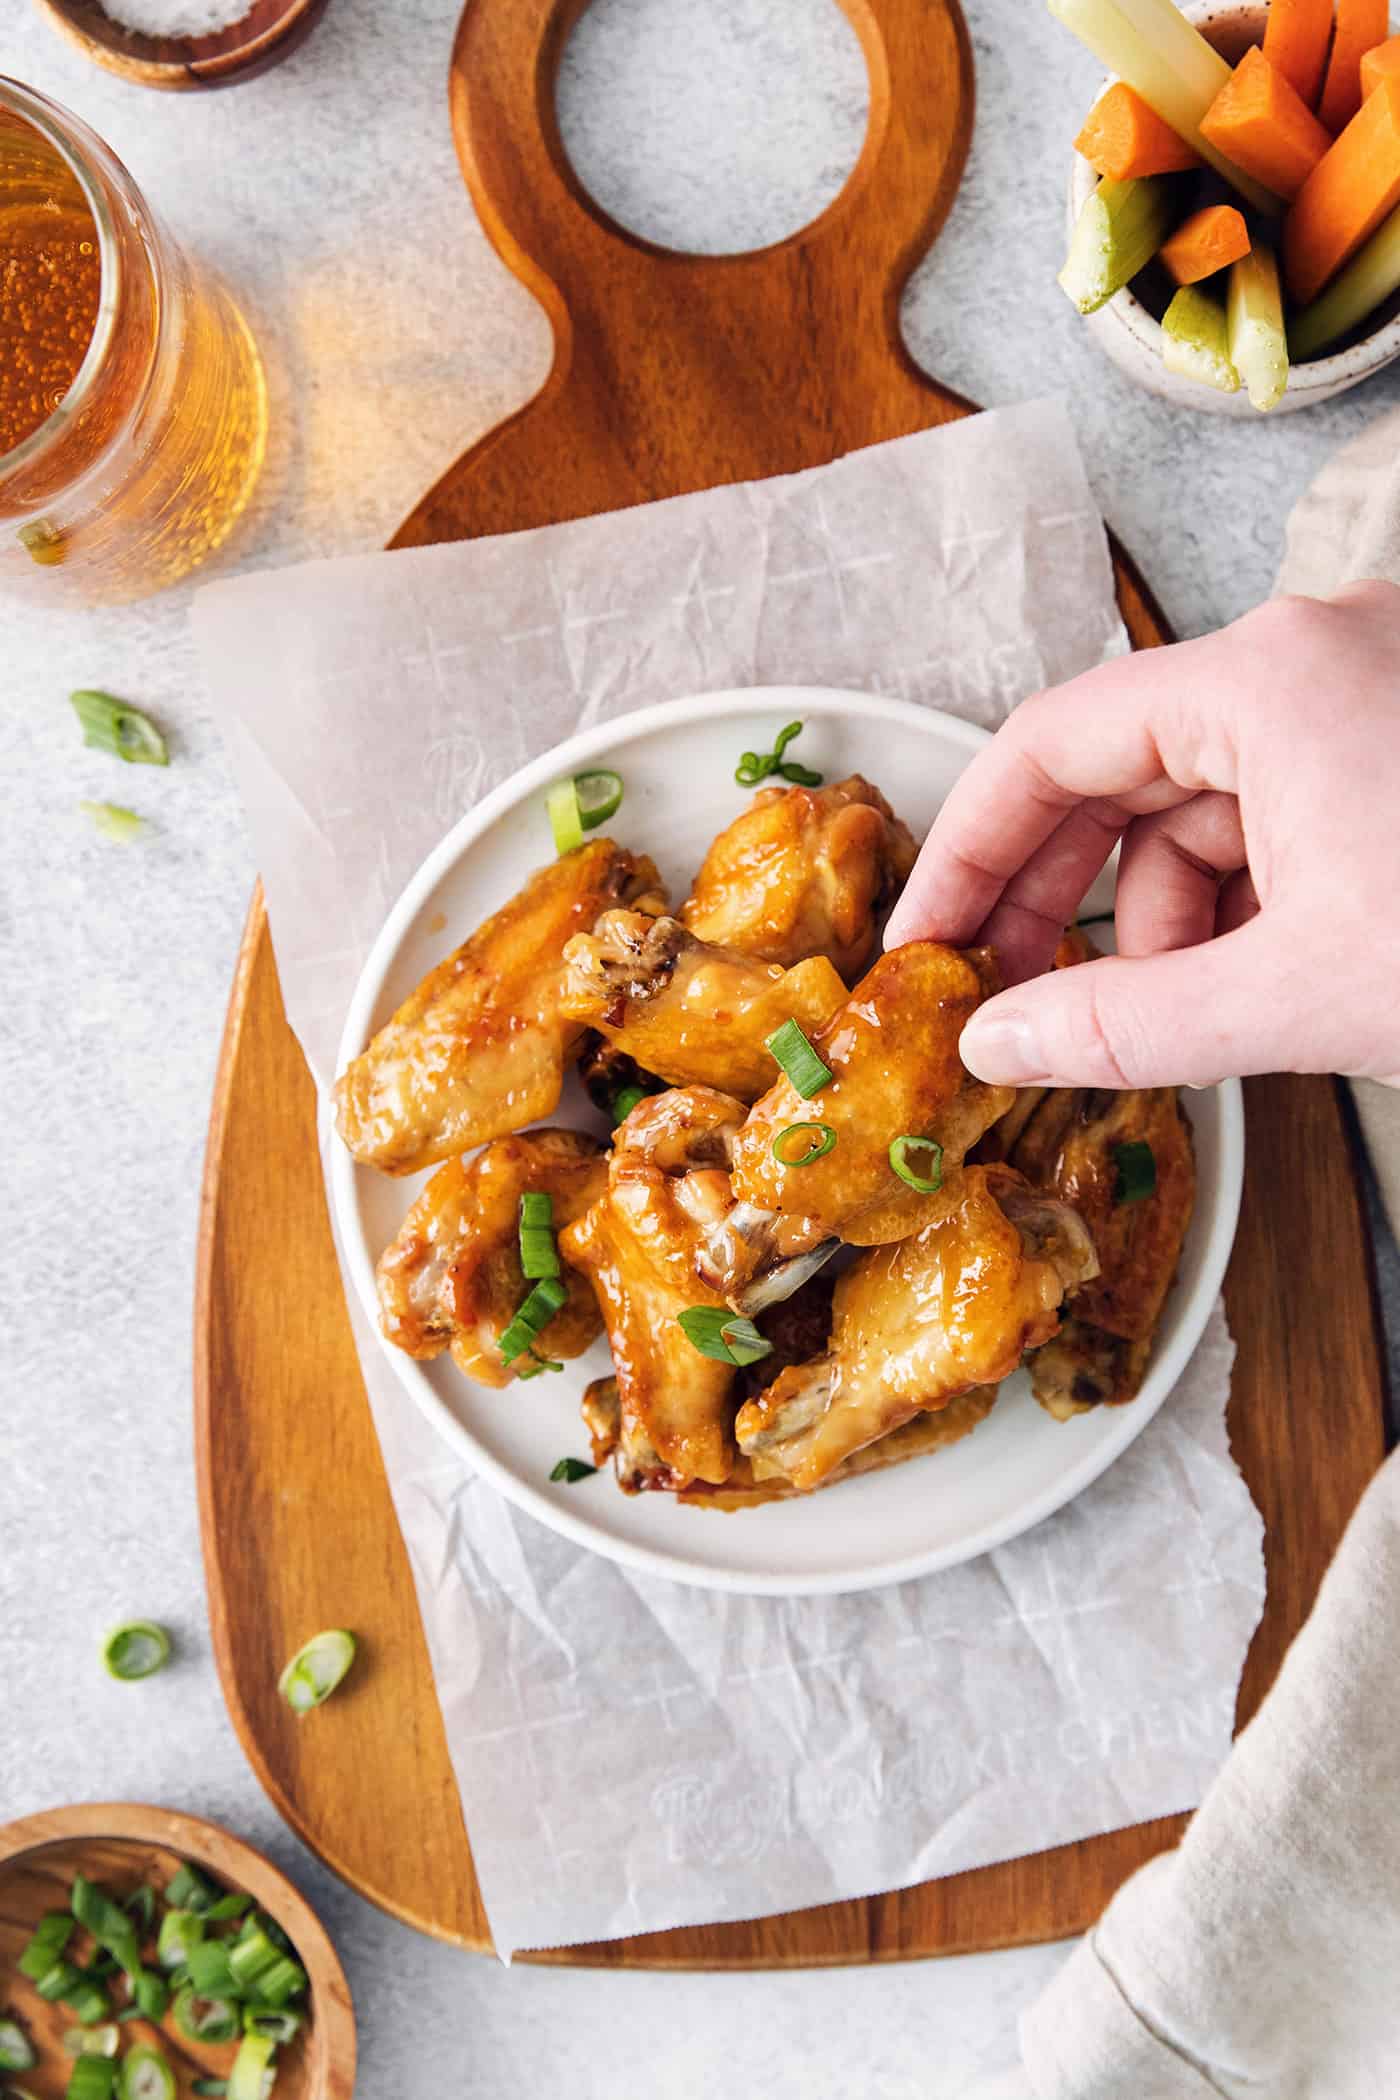 A hand grabbing a crispy baked chicken wing with hot honey sauce